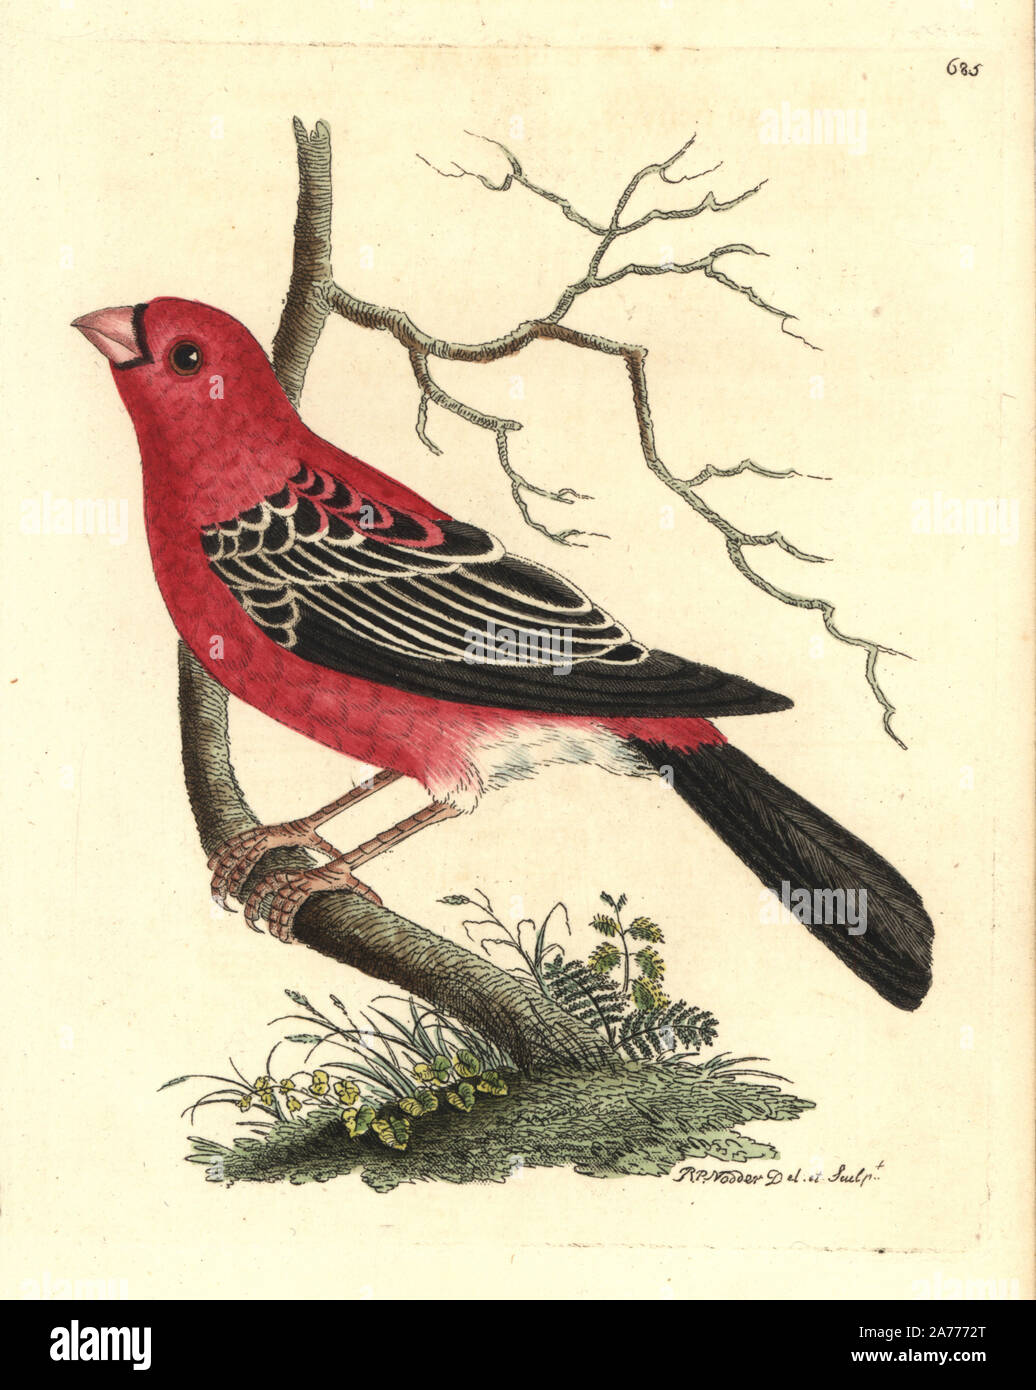 Pine grosbeak, Pinicola enucleator. Illustration drawn and engraved by Richard Polydore Nodder. Handcoloured copperplate engraving from George Shaw and Frederick Nodder's 'The Naturalist's Miscellany,' London, 1801. Stock Photo